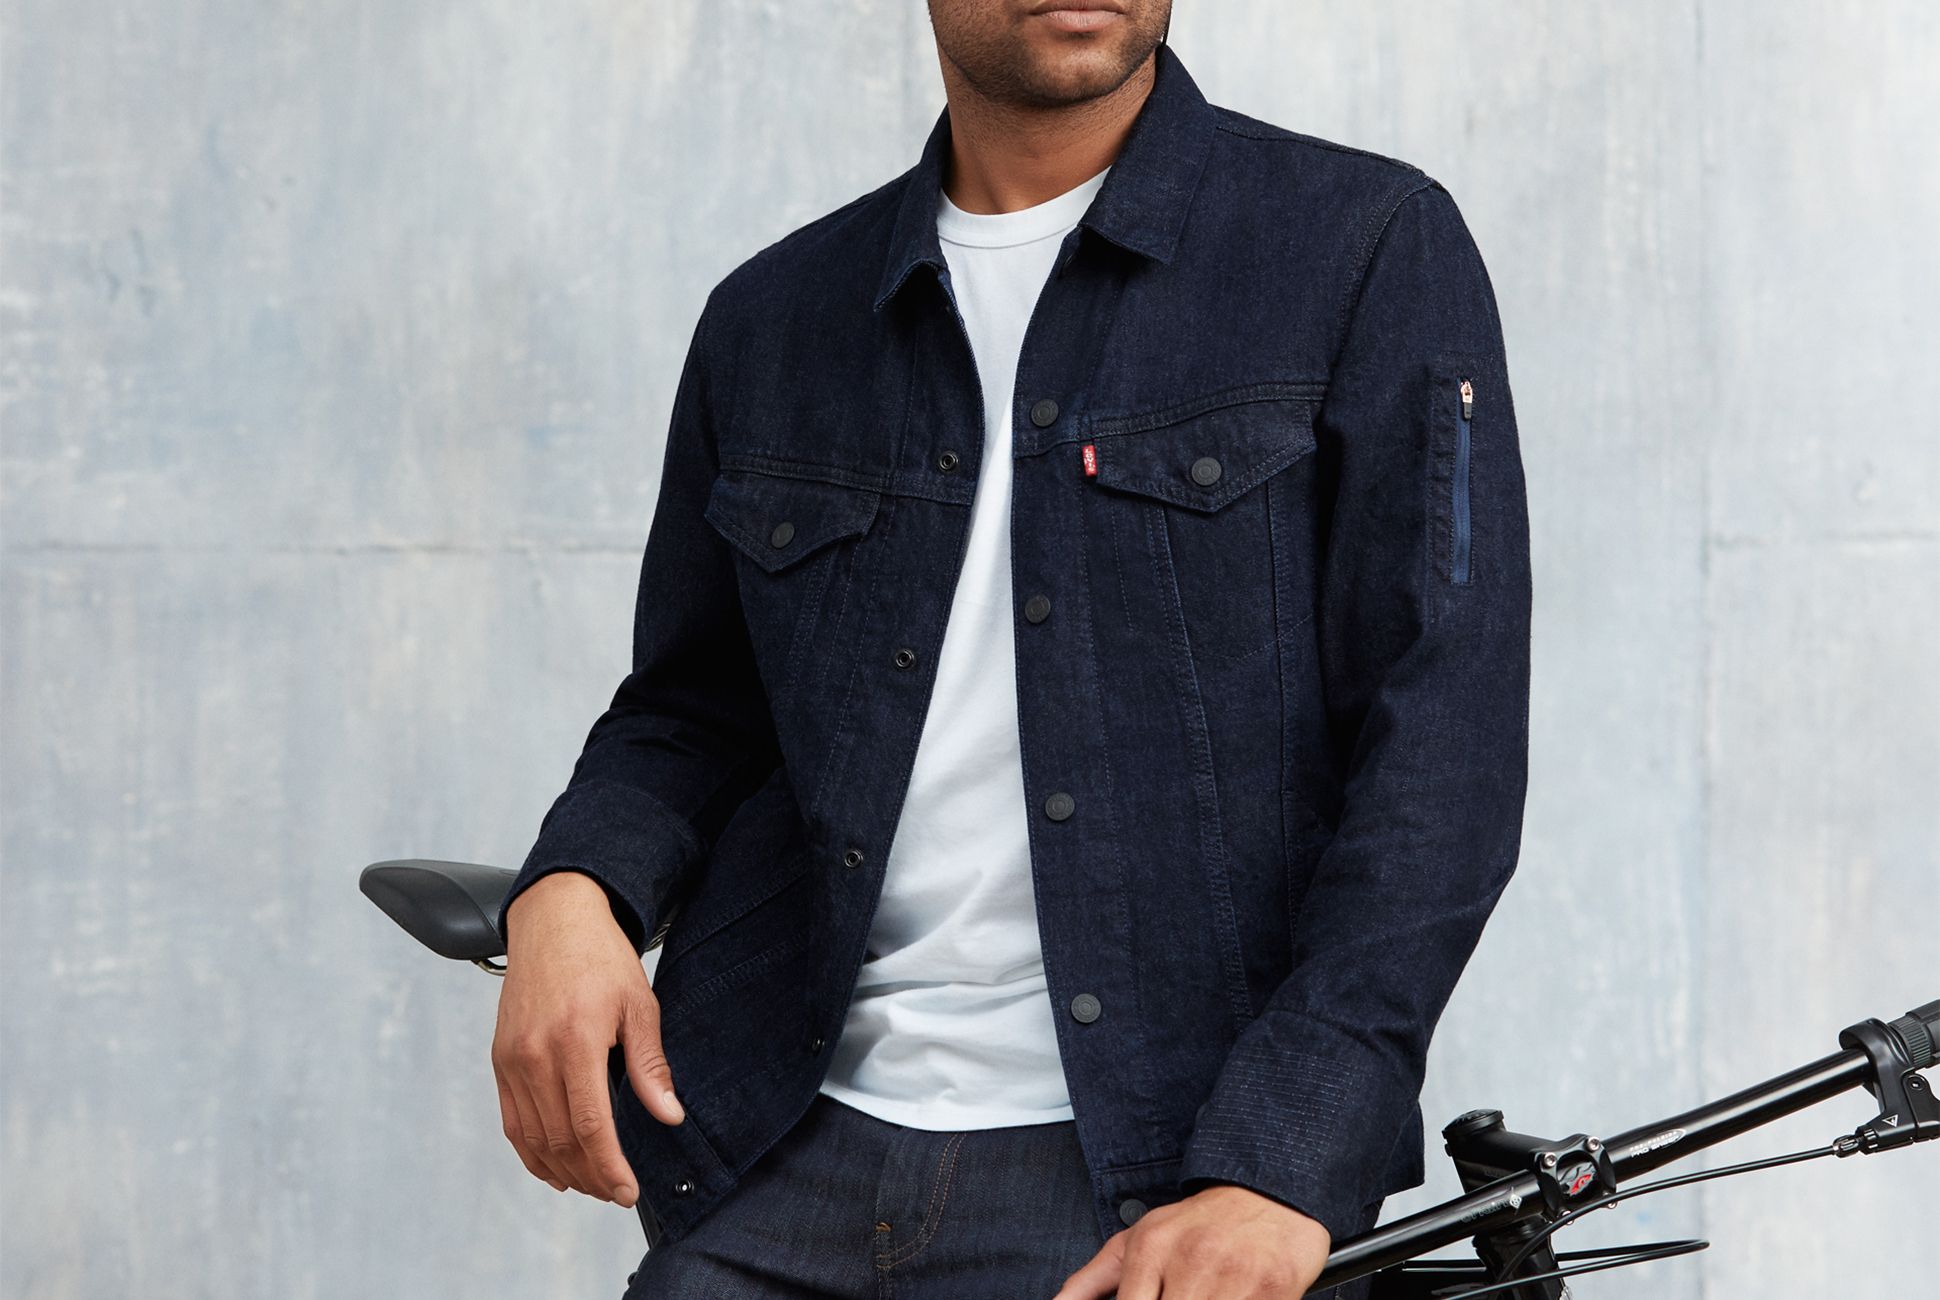 Levi's Tech-Infused Denim Jacket Will Make Your Commute Safer - Gear Patrol